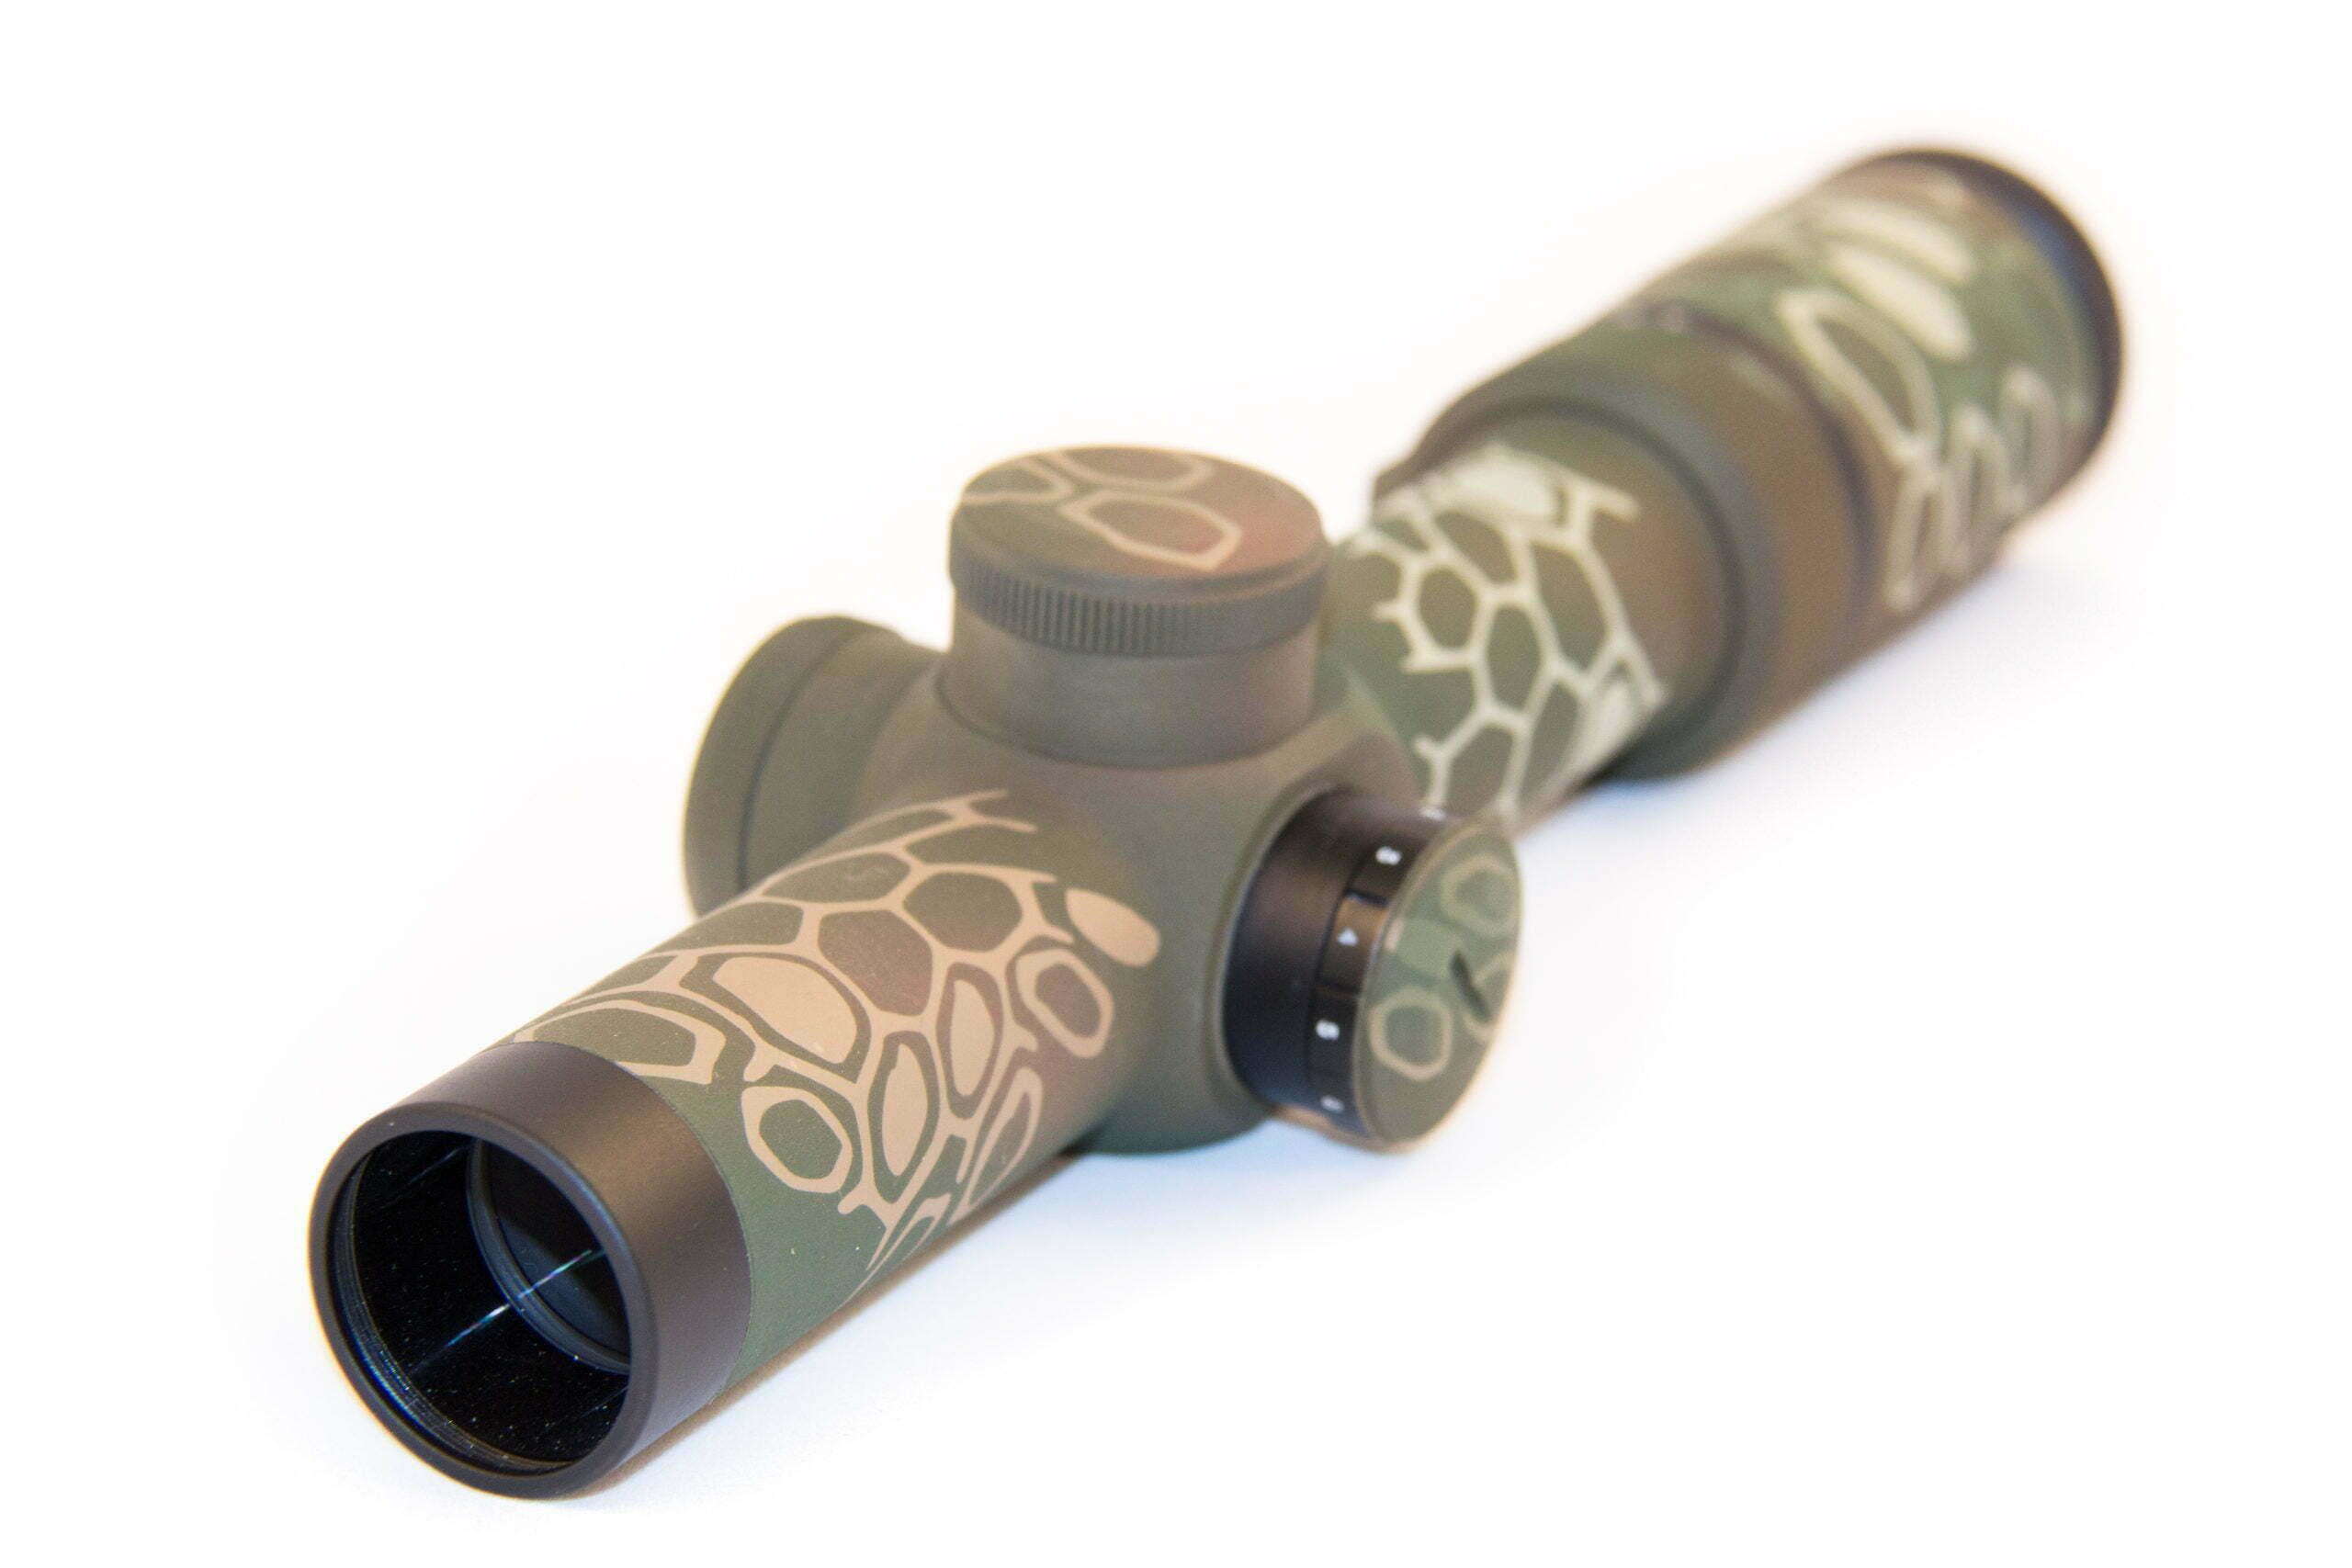 Shepherd Scopes Offers Cerakote Services in a Variety of Colors and Patterns